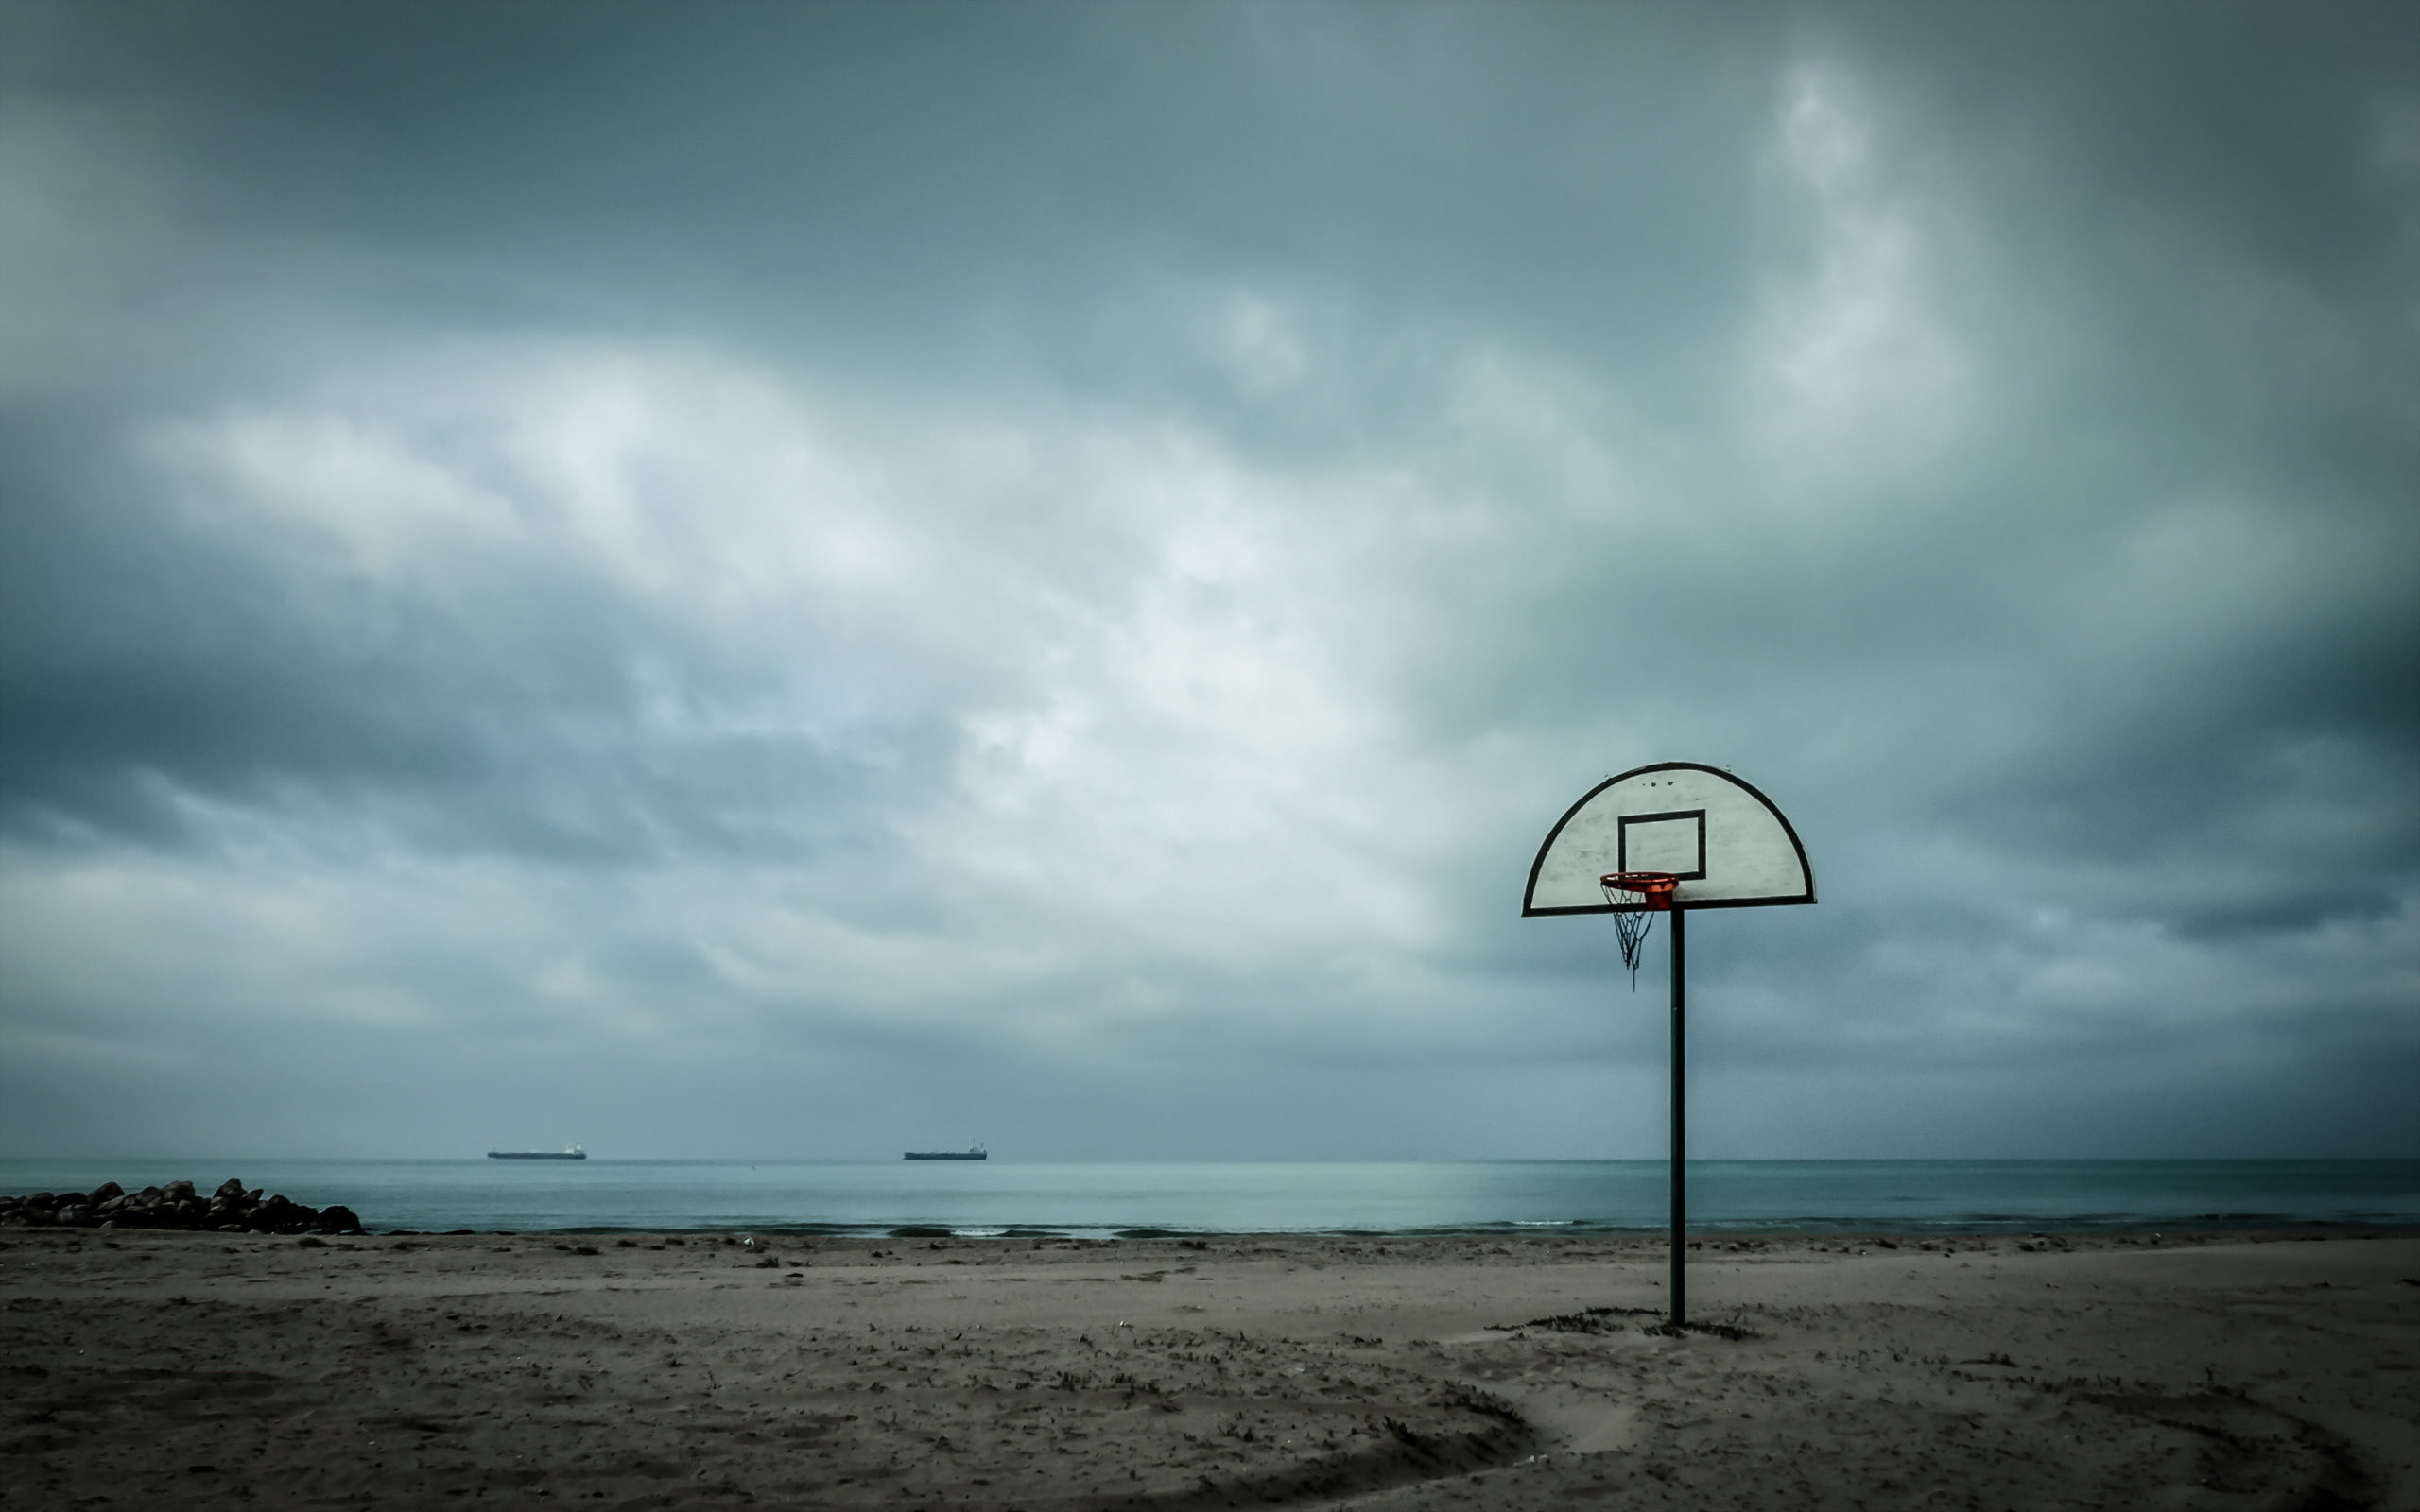 2560x1600 18+ Basketball Wallpapers, Sports Backgrounds, Images, Pictures .